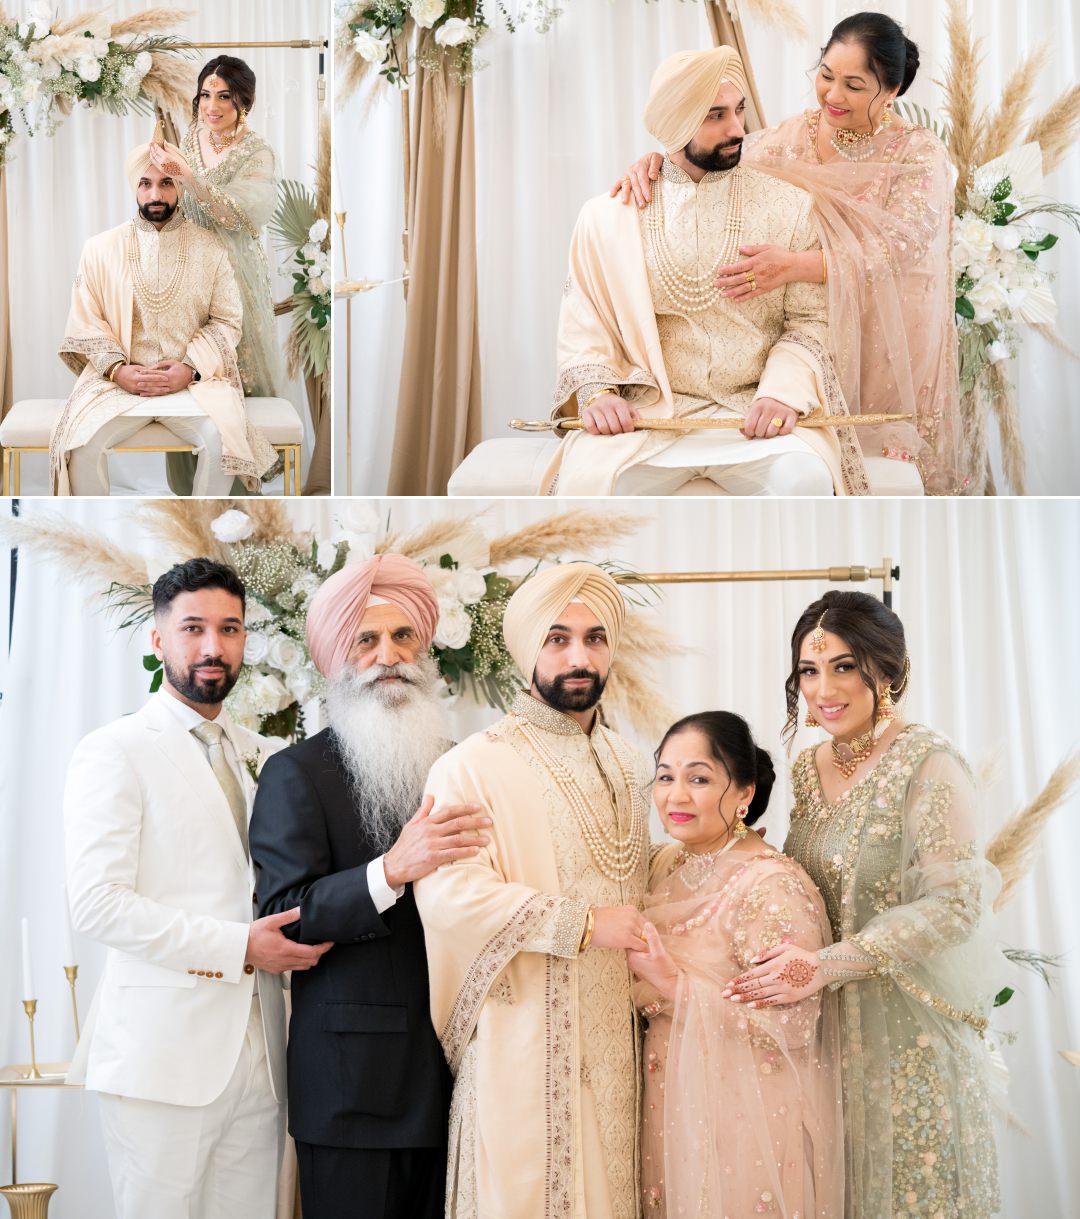 Sikh groom and his family portraits